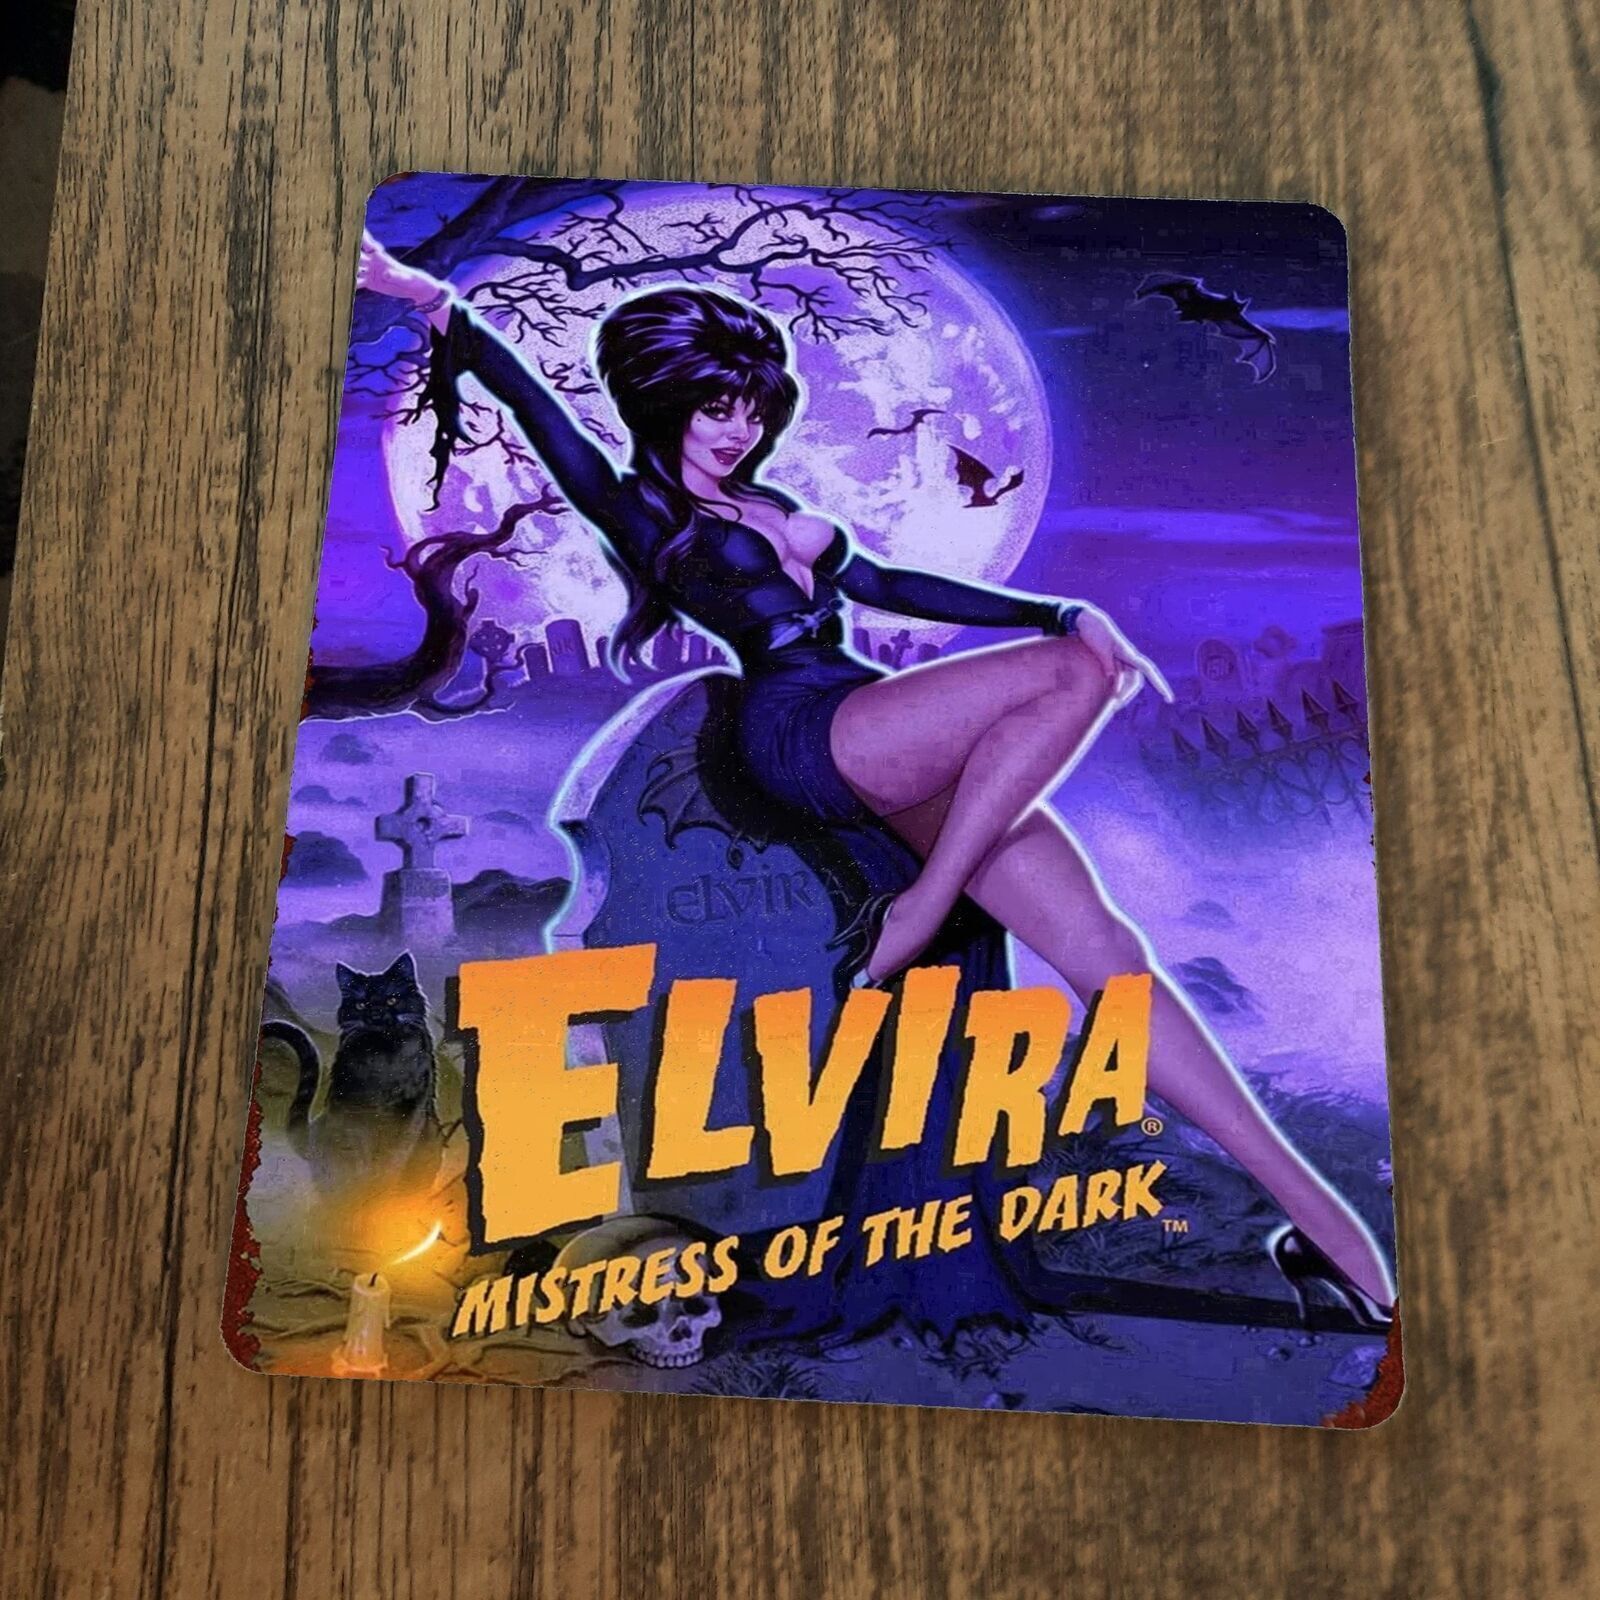 Blue Elvira Mistress of the Dark in Cemetery Mouse Pad